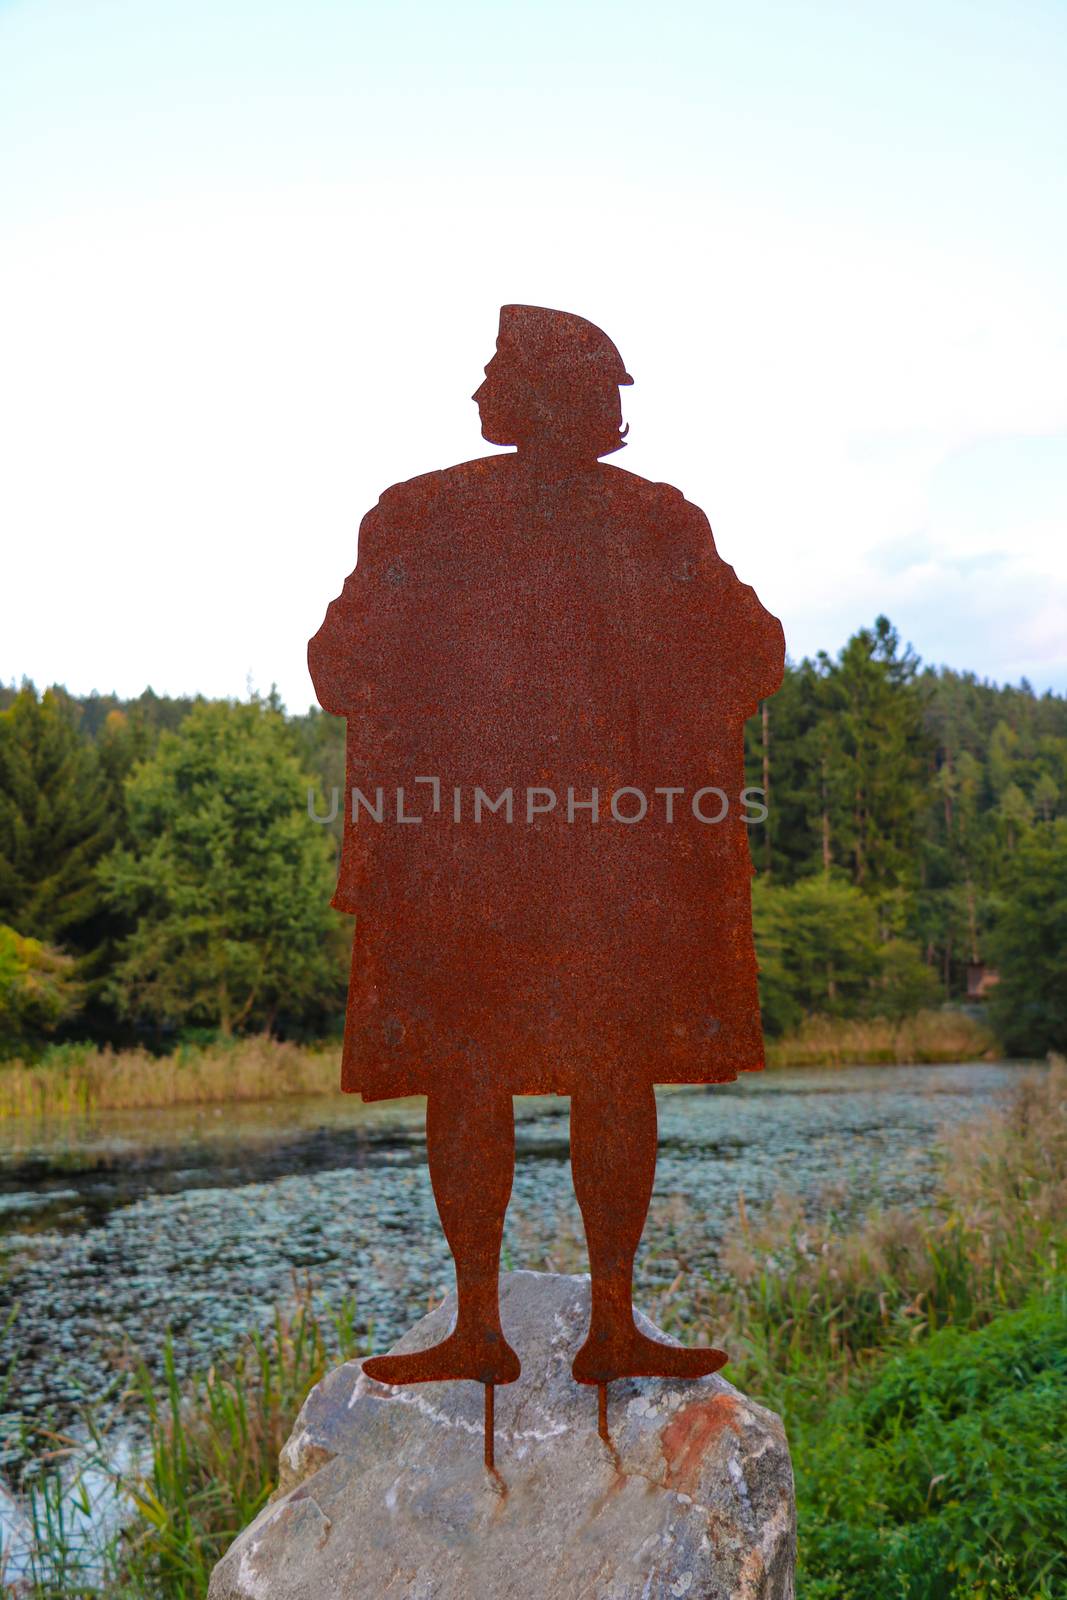 A rusty iron statue on a large stone